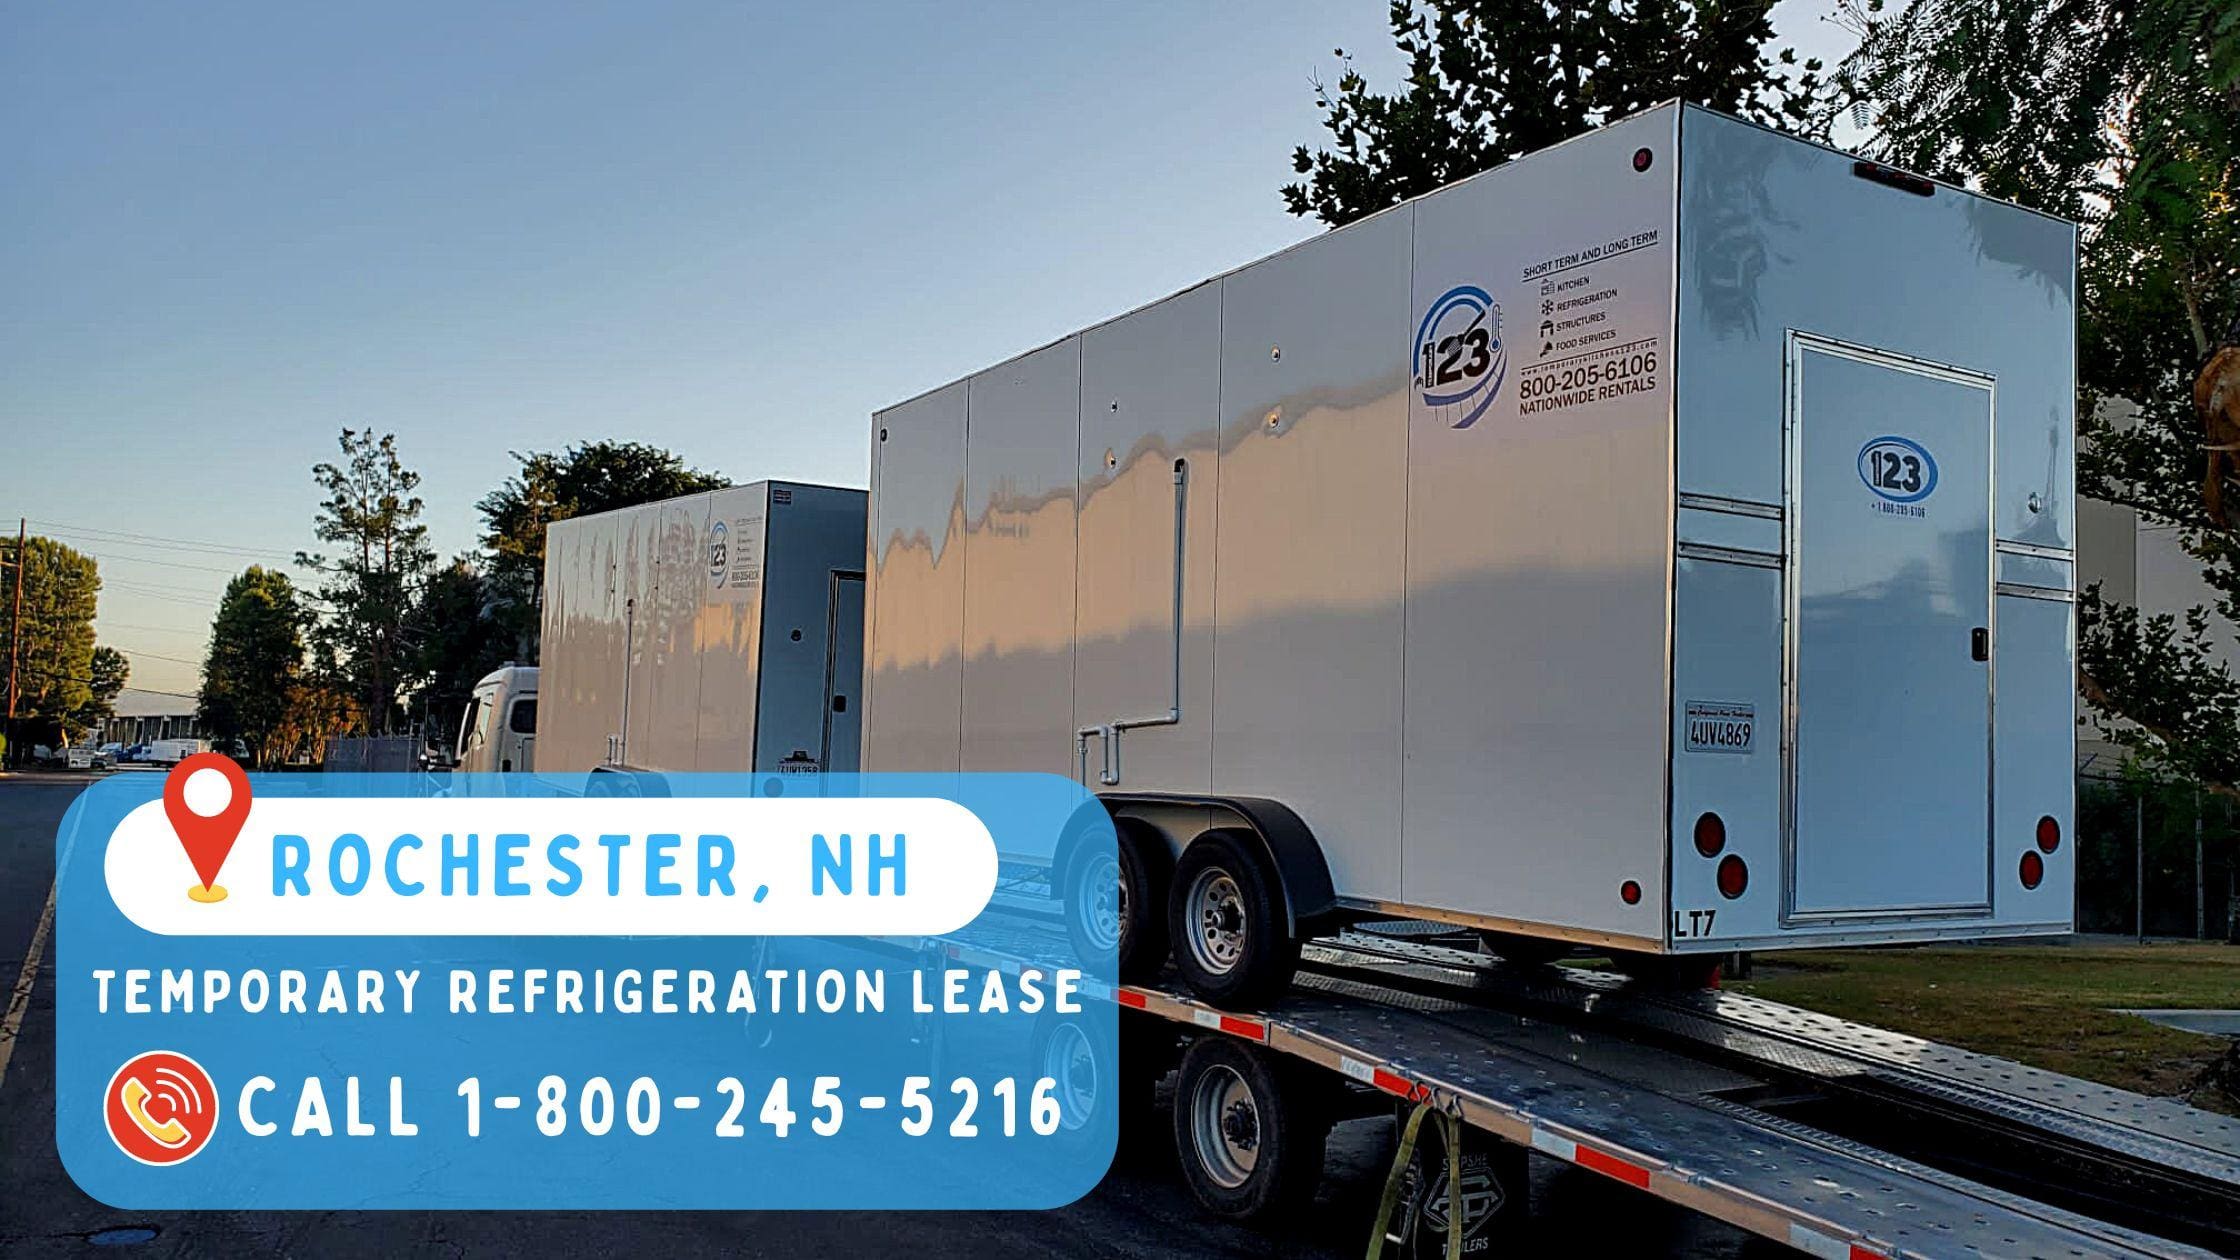 Temporary Refrigeration Lease in Rochester